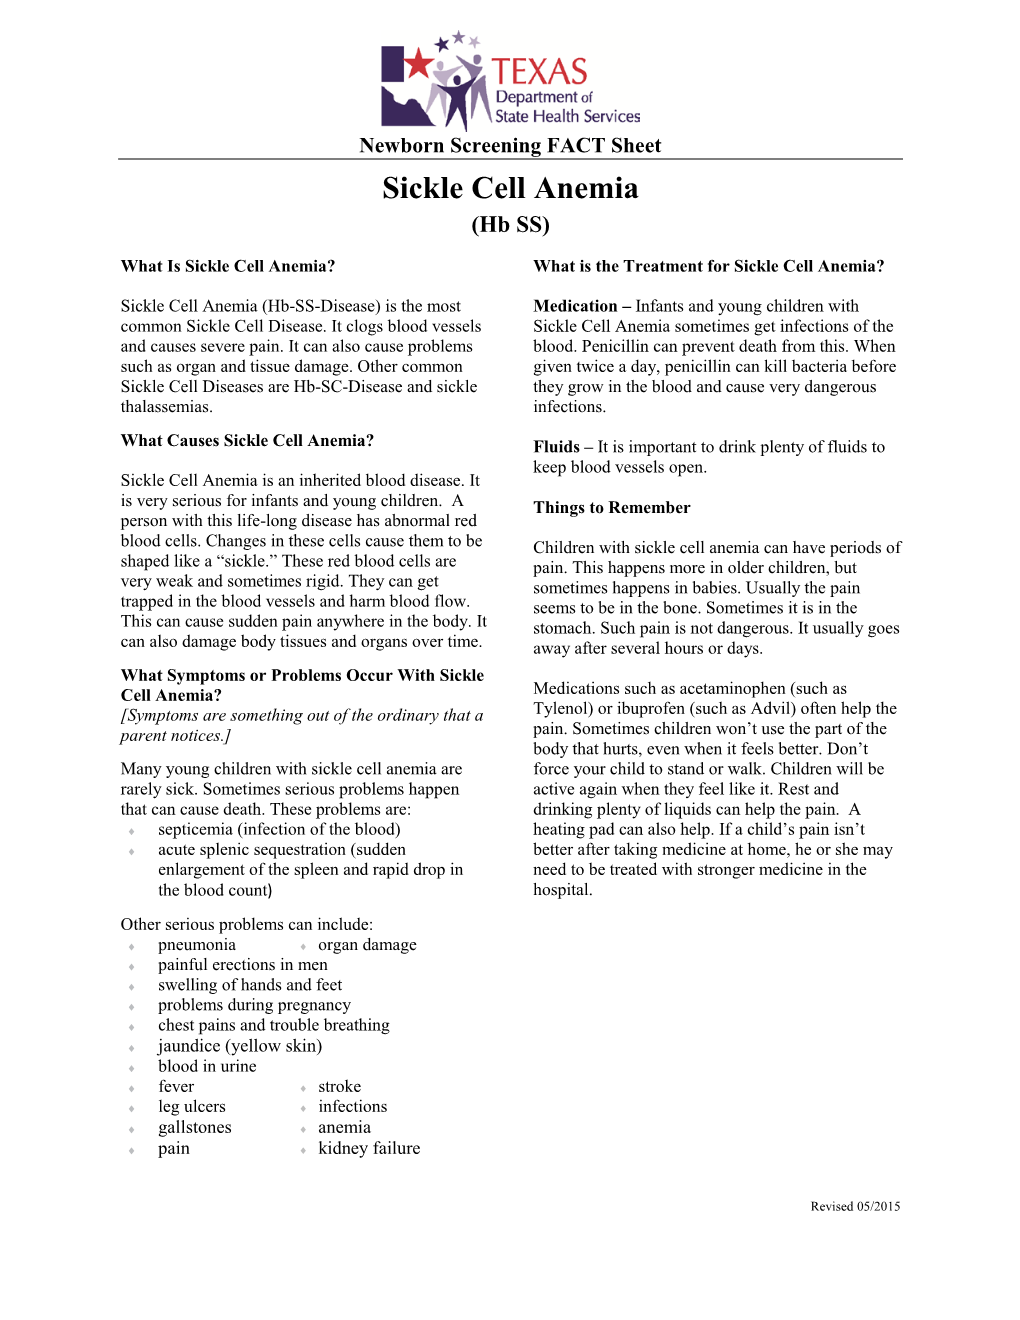 Hemoglobin SS Disease Or Sickle Cell Anemia